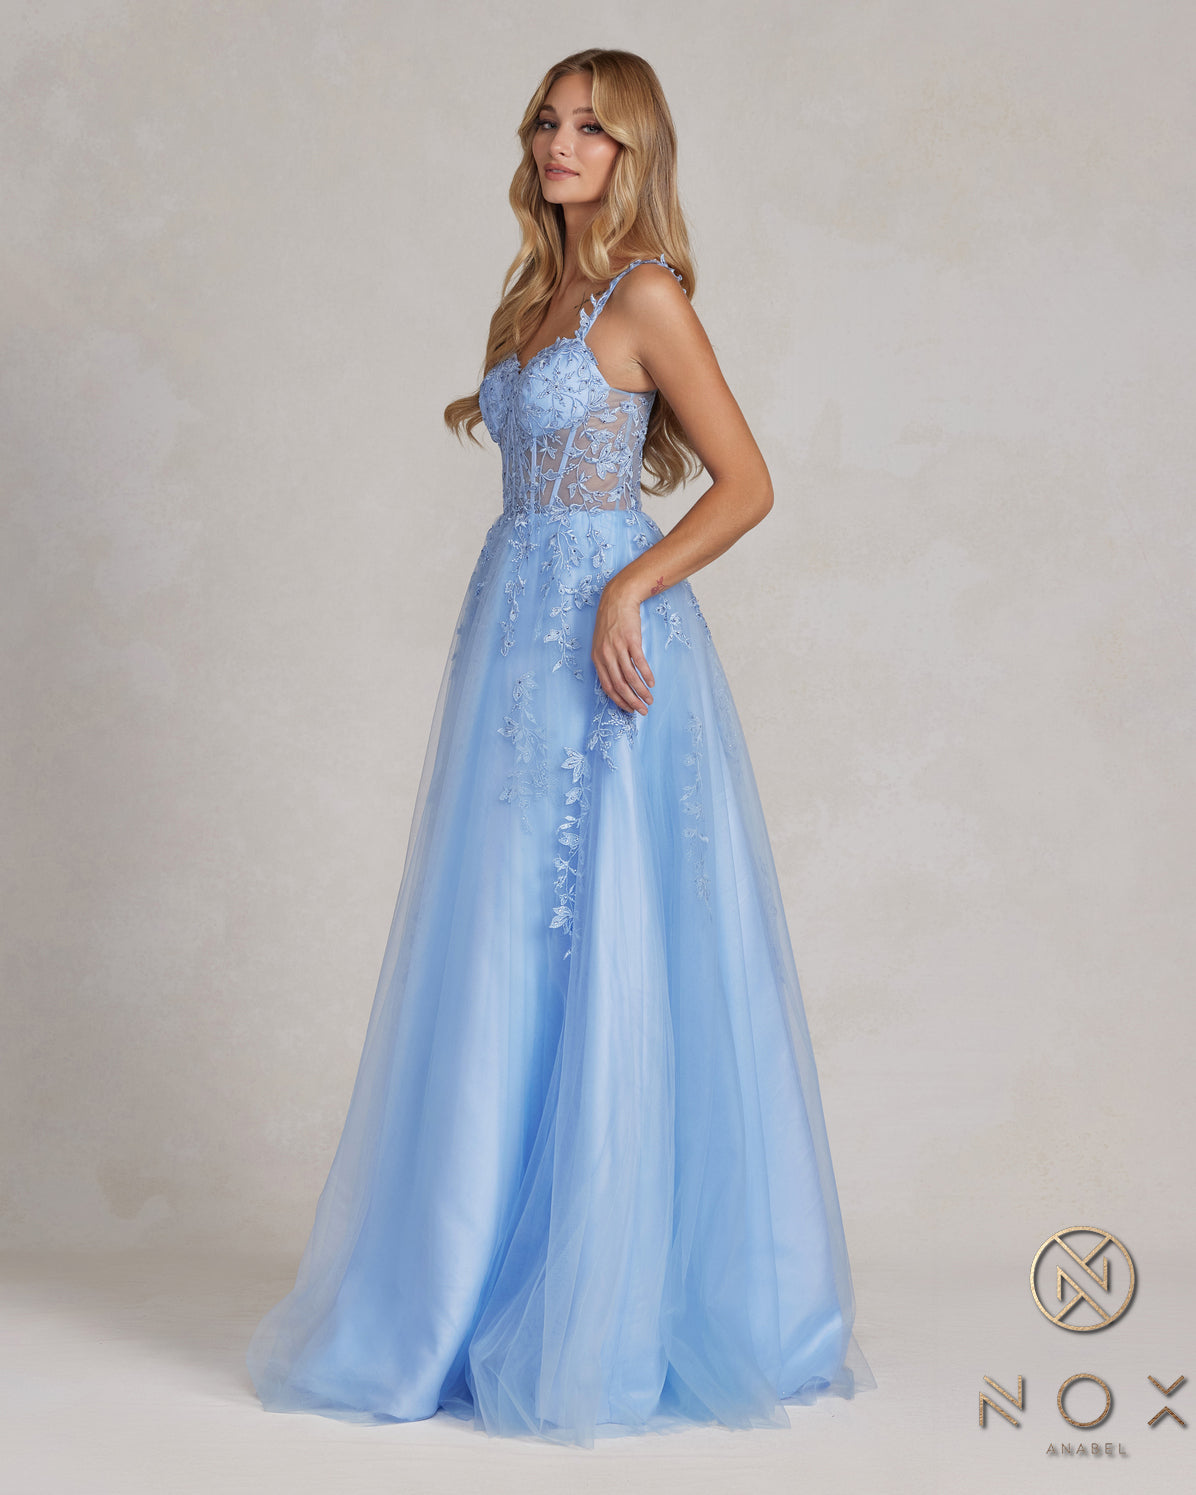 Nox Anabel T1082 Long Sexy A Line BlueProm Ball Gown Lemon